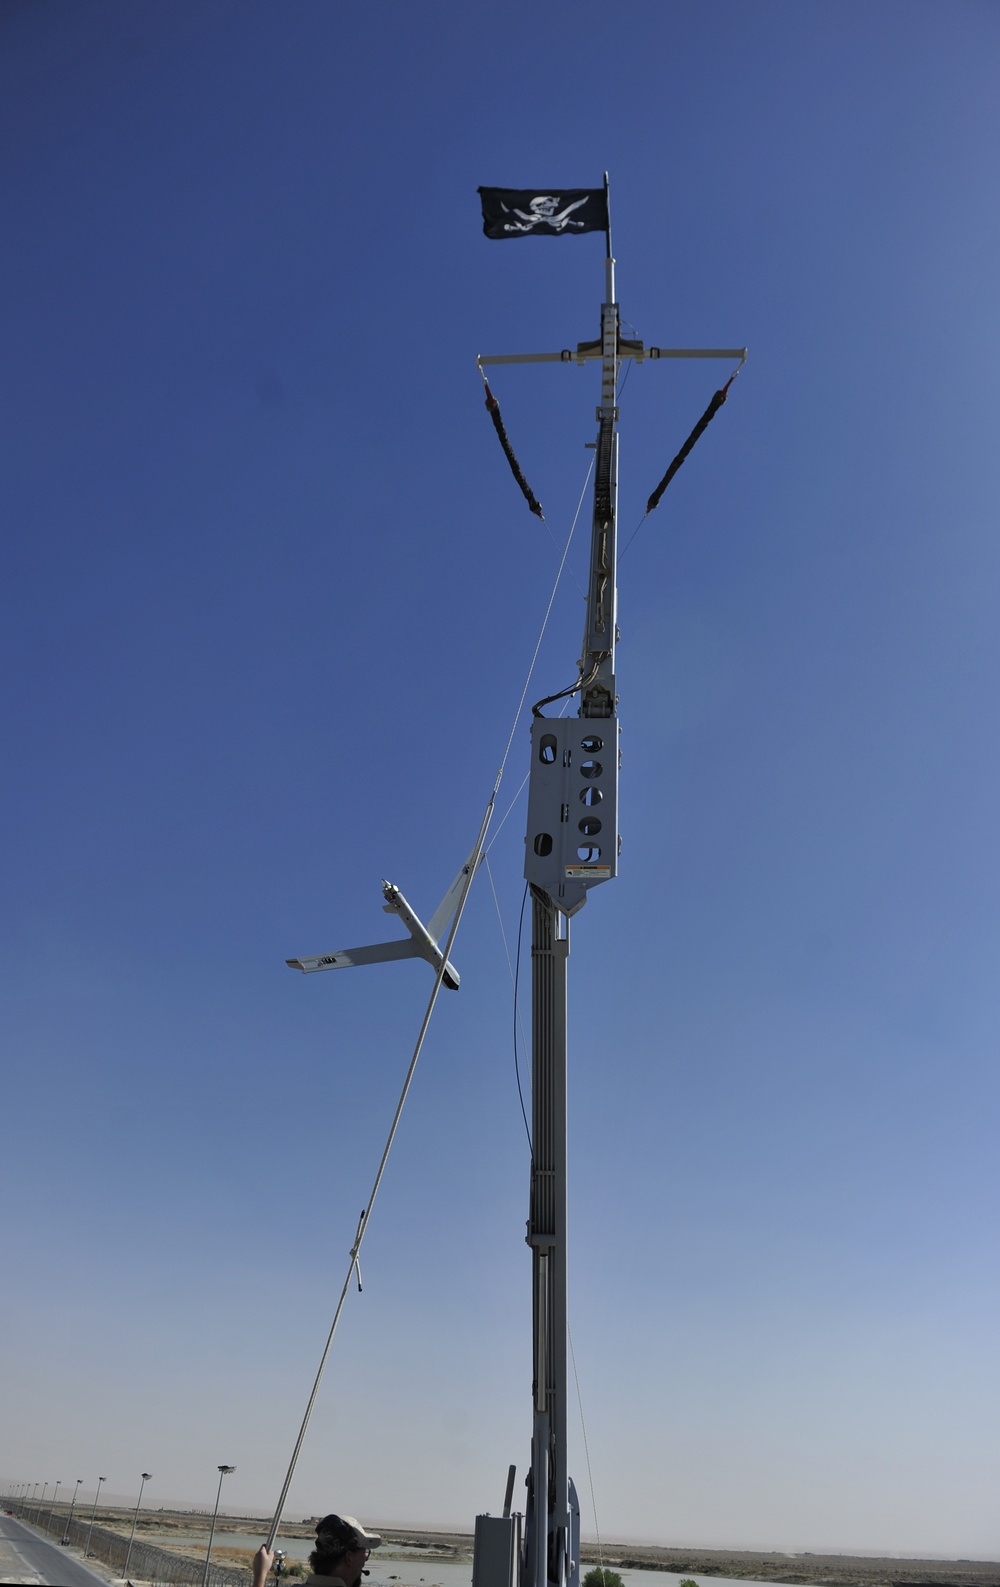 ScanEagle unmanned aerial vehicle hangs from the vertical cable after being recovered by the Skyhook system at Kandahar Airfield June 25, 2015